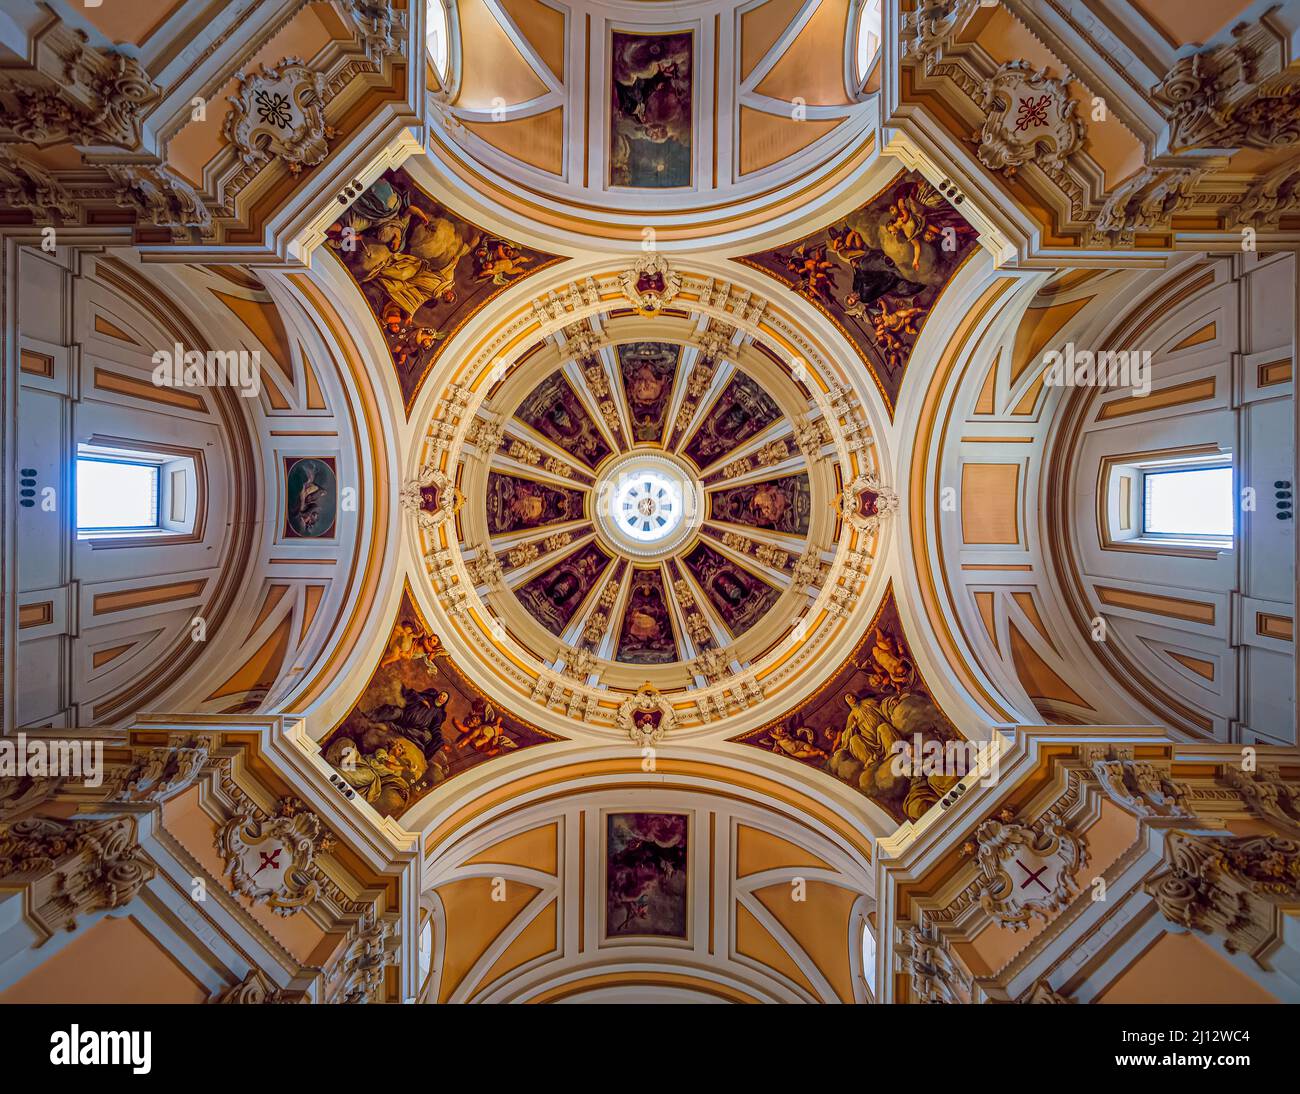 Dome of a church with ocher tones and fresco paintings Stock Photo